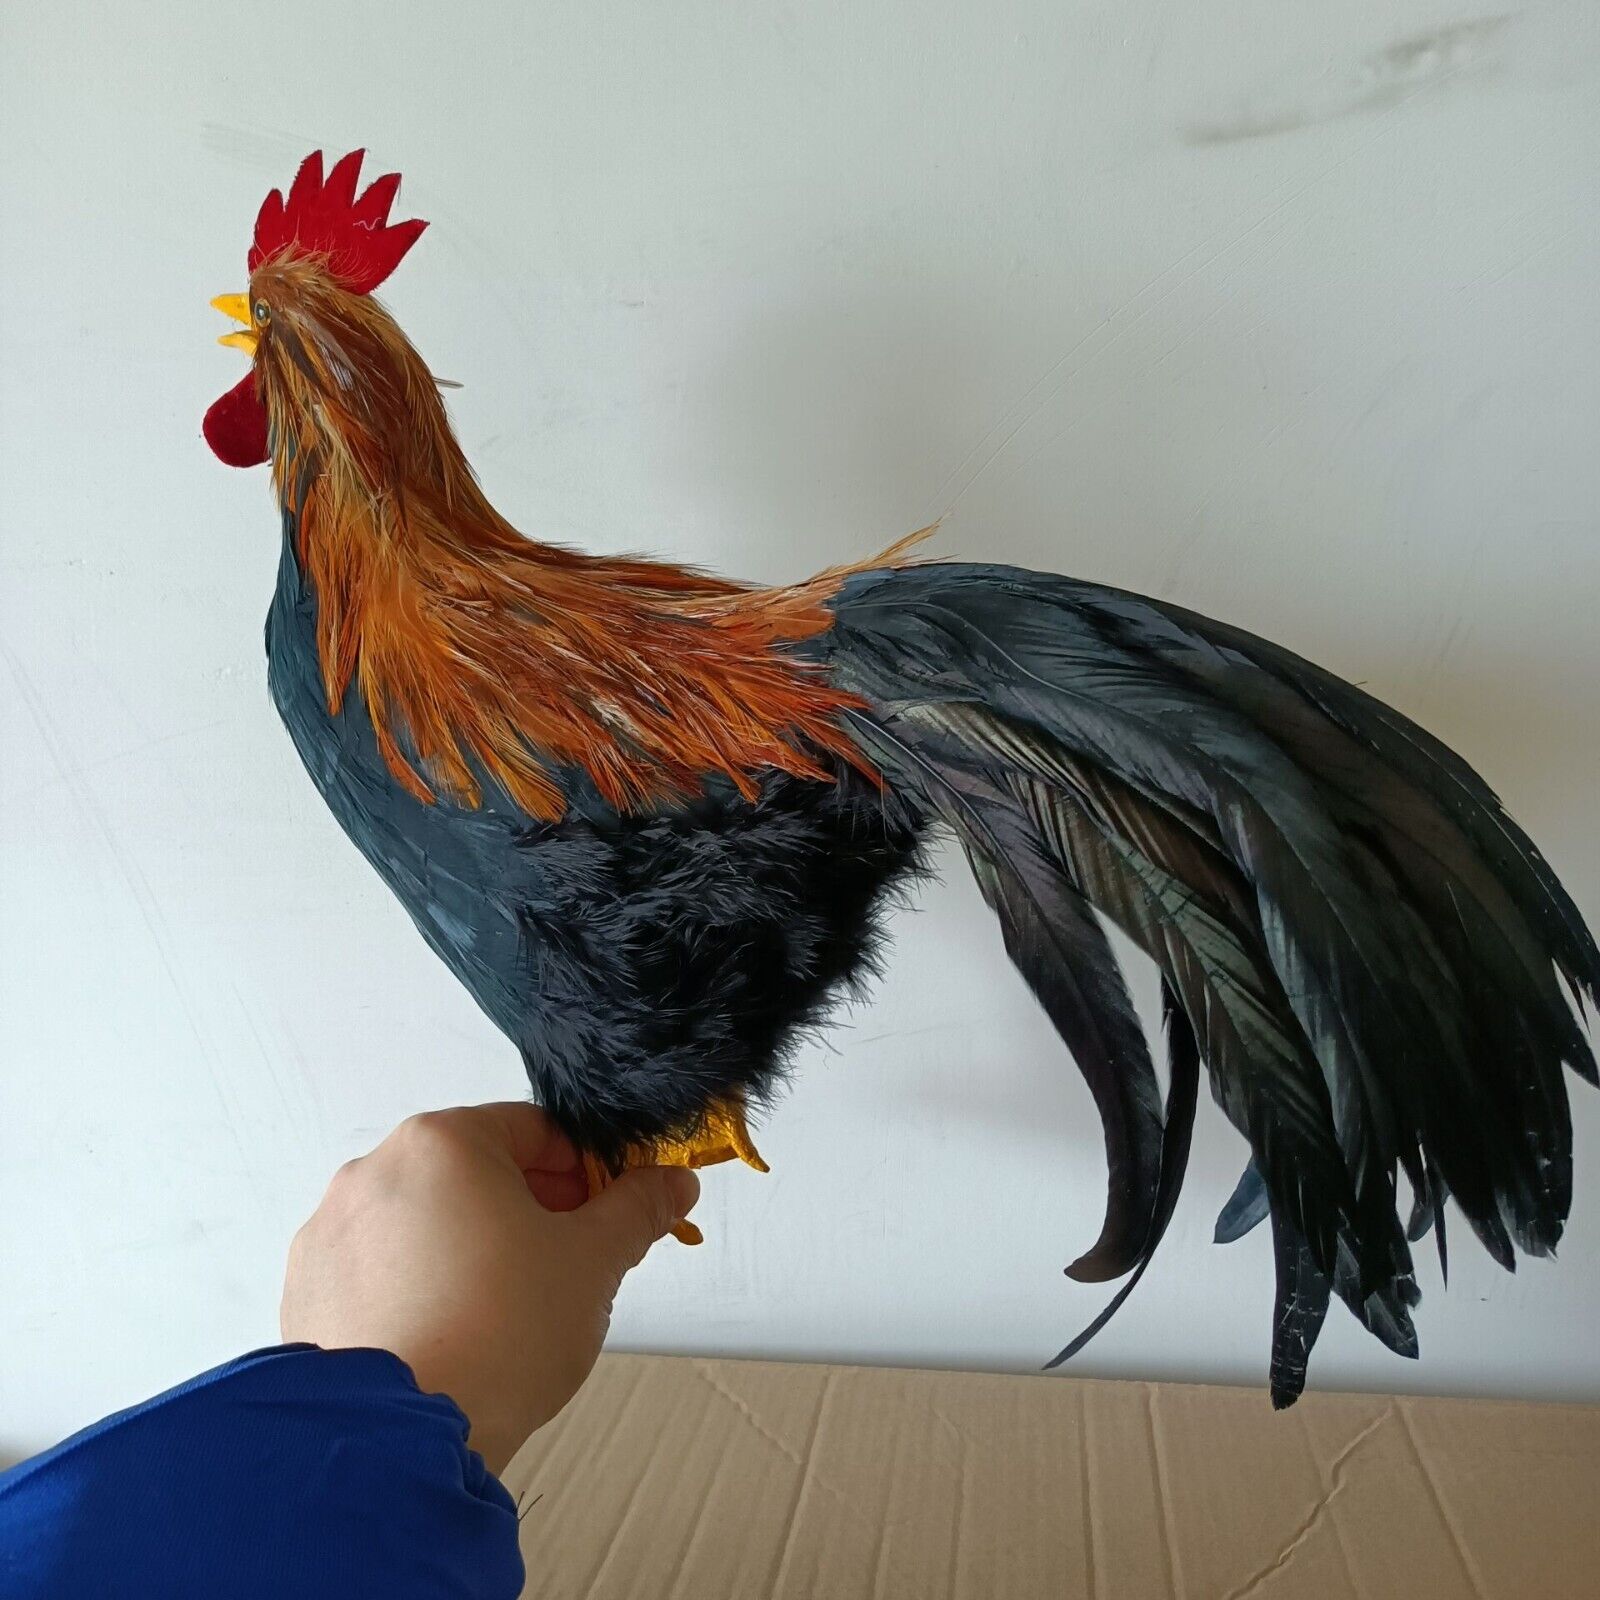 big simulation plastic and feathers chicken model toy gift about 45cm